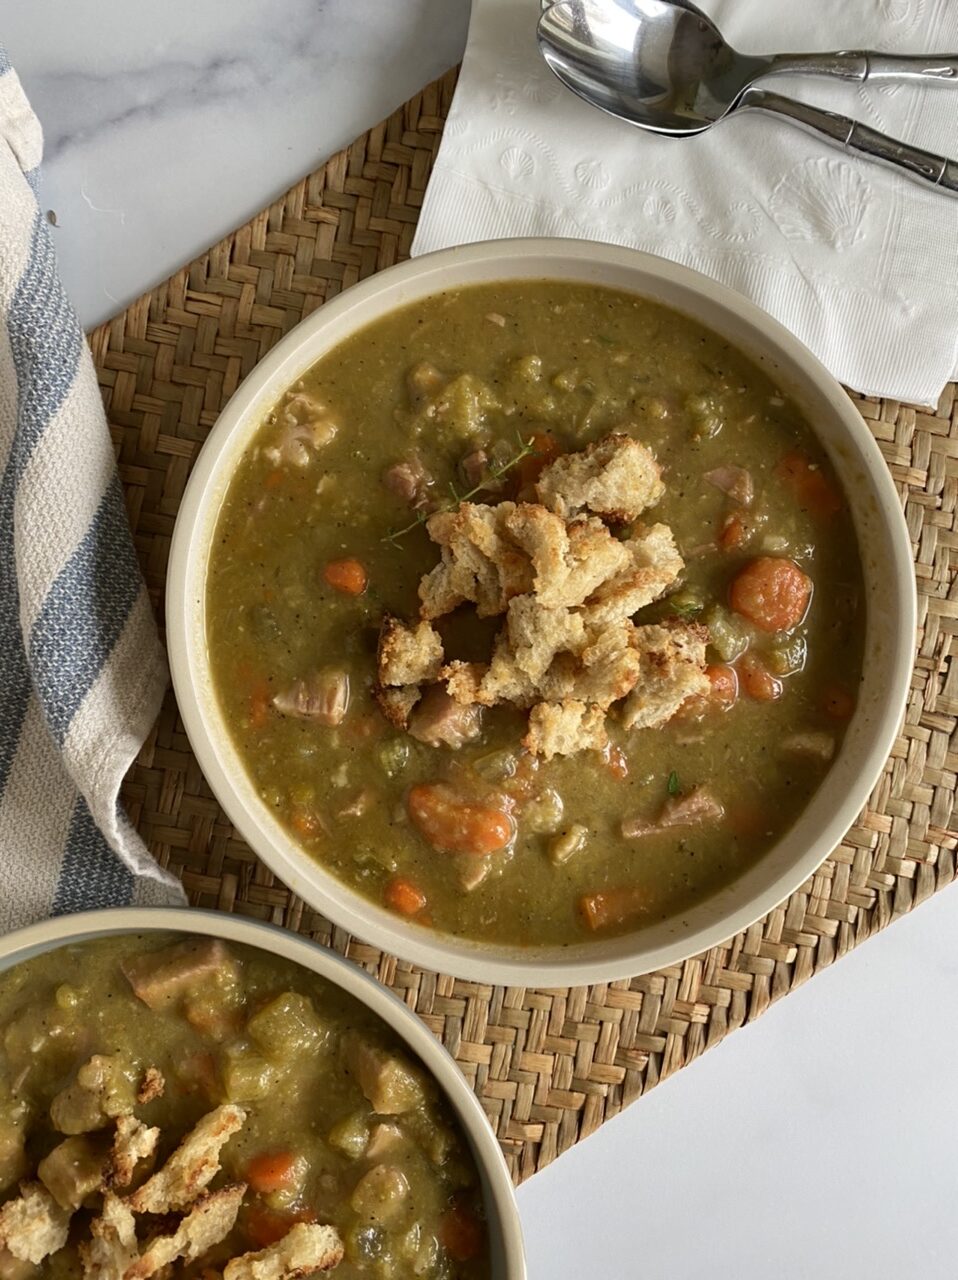 Two bowls of split pea soup with croutons and spoons on a woven mat